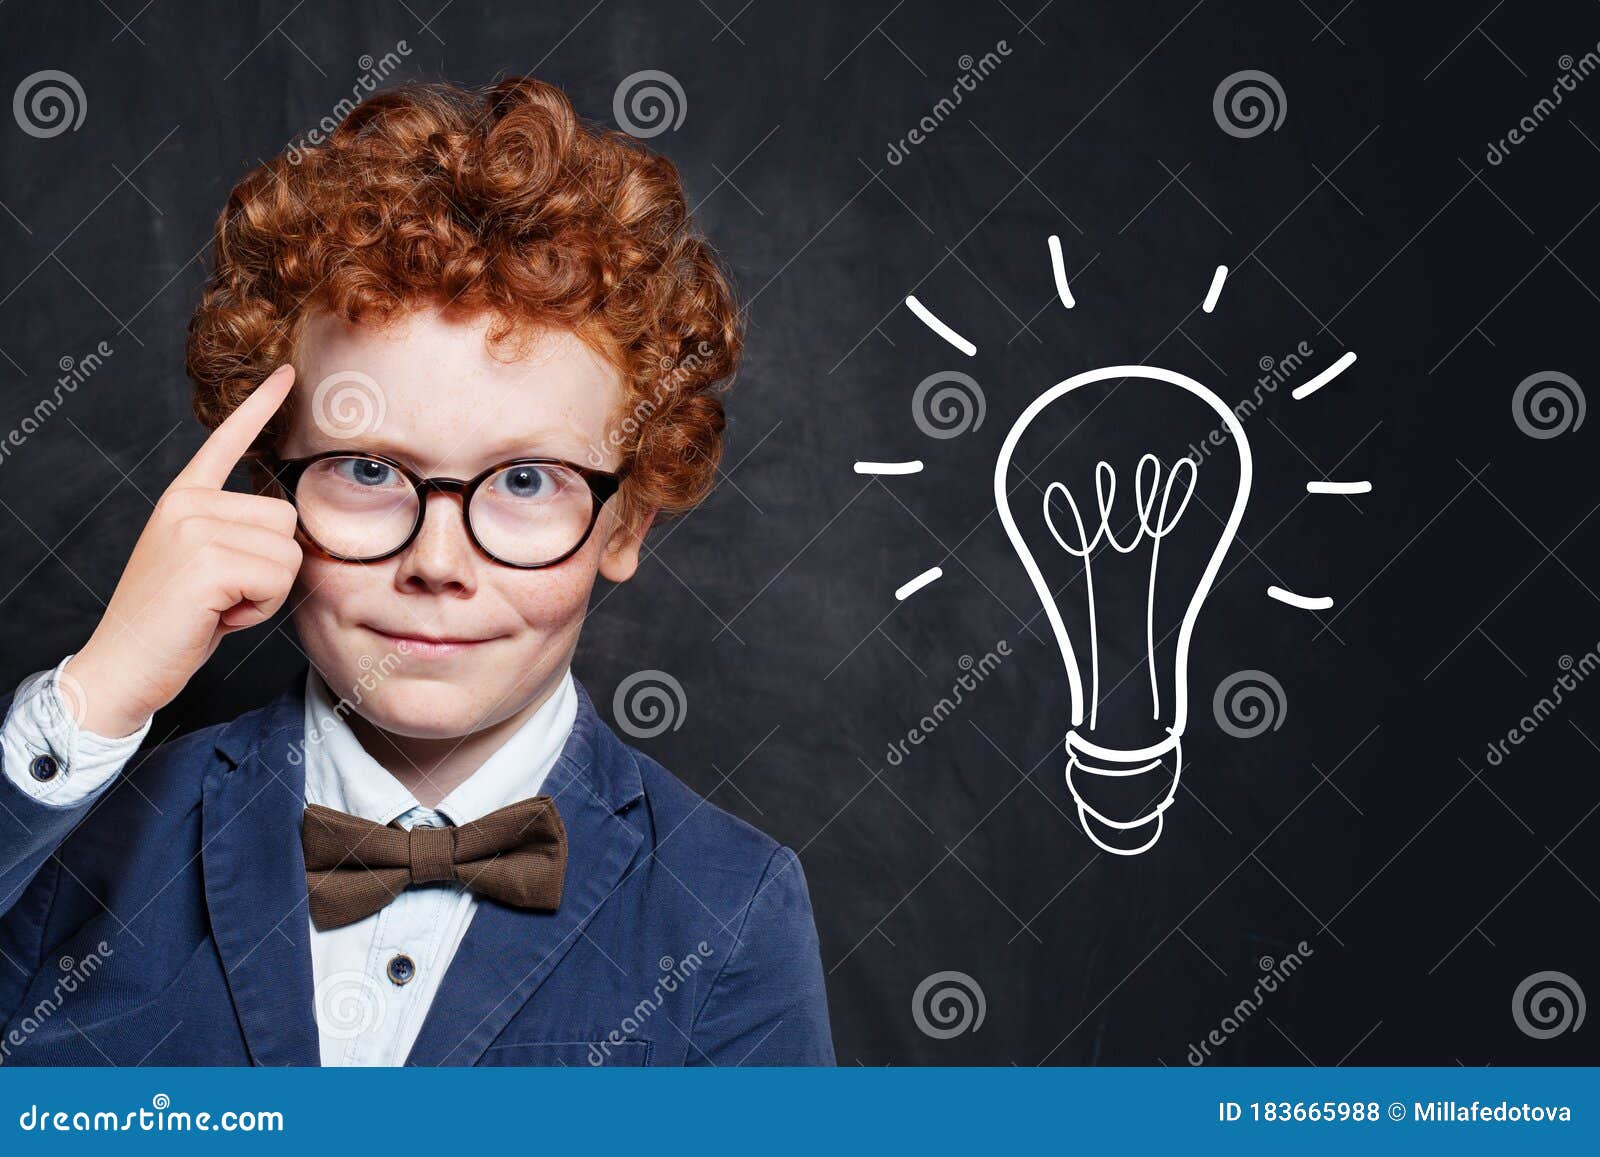 clever boy in glasses with idea lightbulb on blackboard background